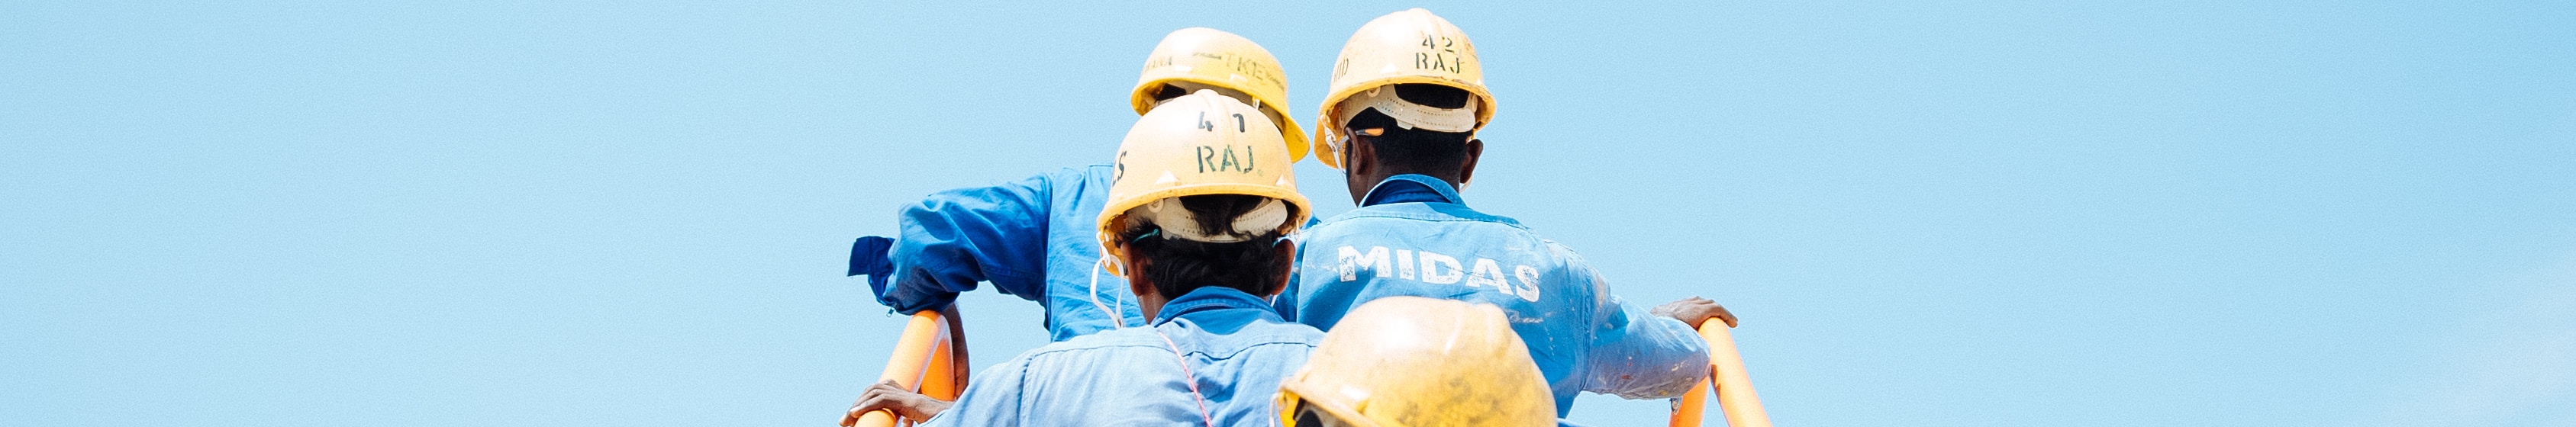 Yara contributes to economic growth and social stability by employing 17,506 people globally